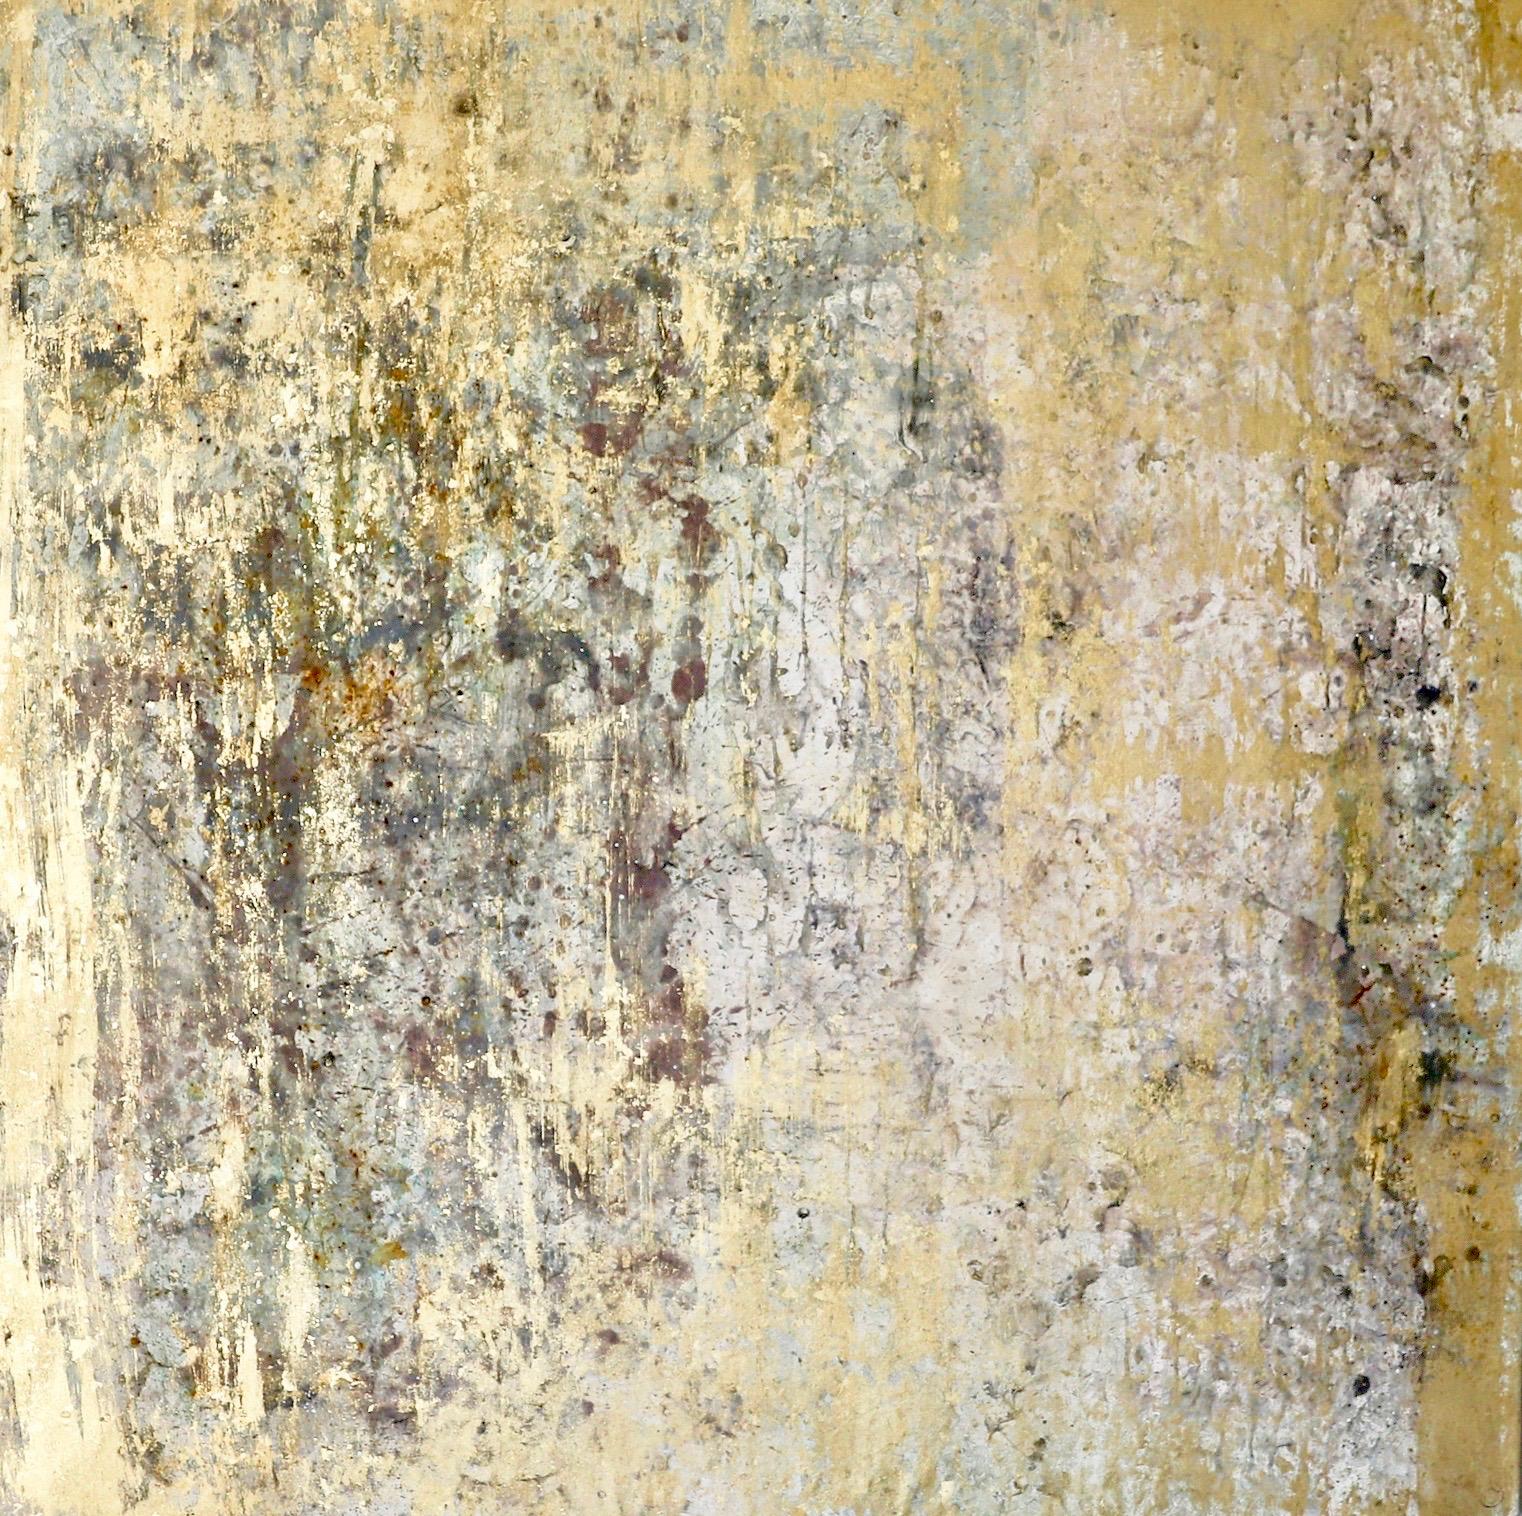 Nicolas Galtier Abstract Painting - N° 150-21, 2020 (Painting Gold Leaf)